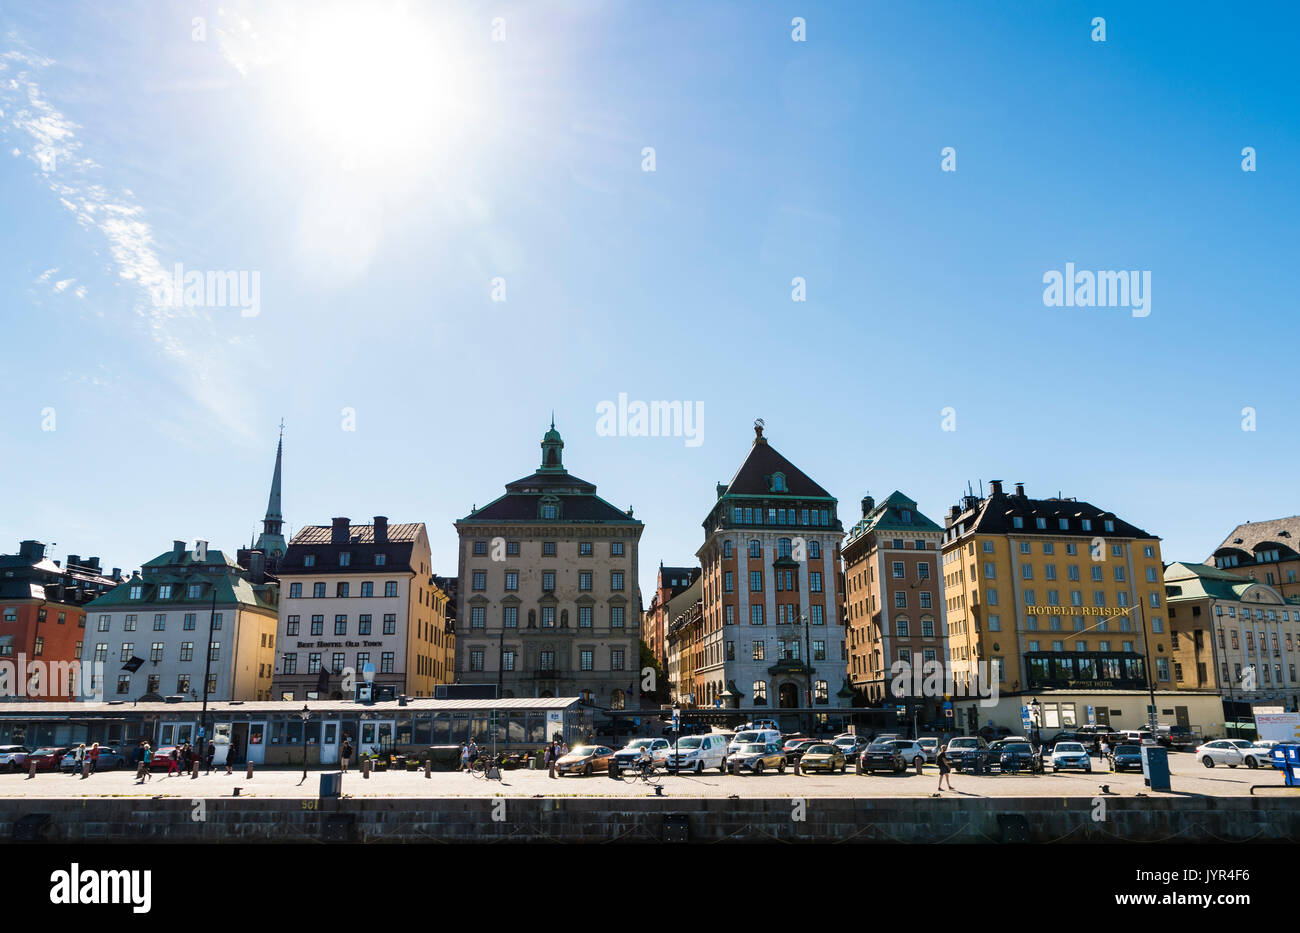 View of Skeppsbron, Gamla Stan, Stockholm, Sweden. Pretty quayside buildings on a sunny day. Stock Photo